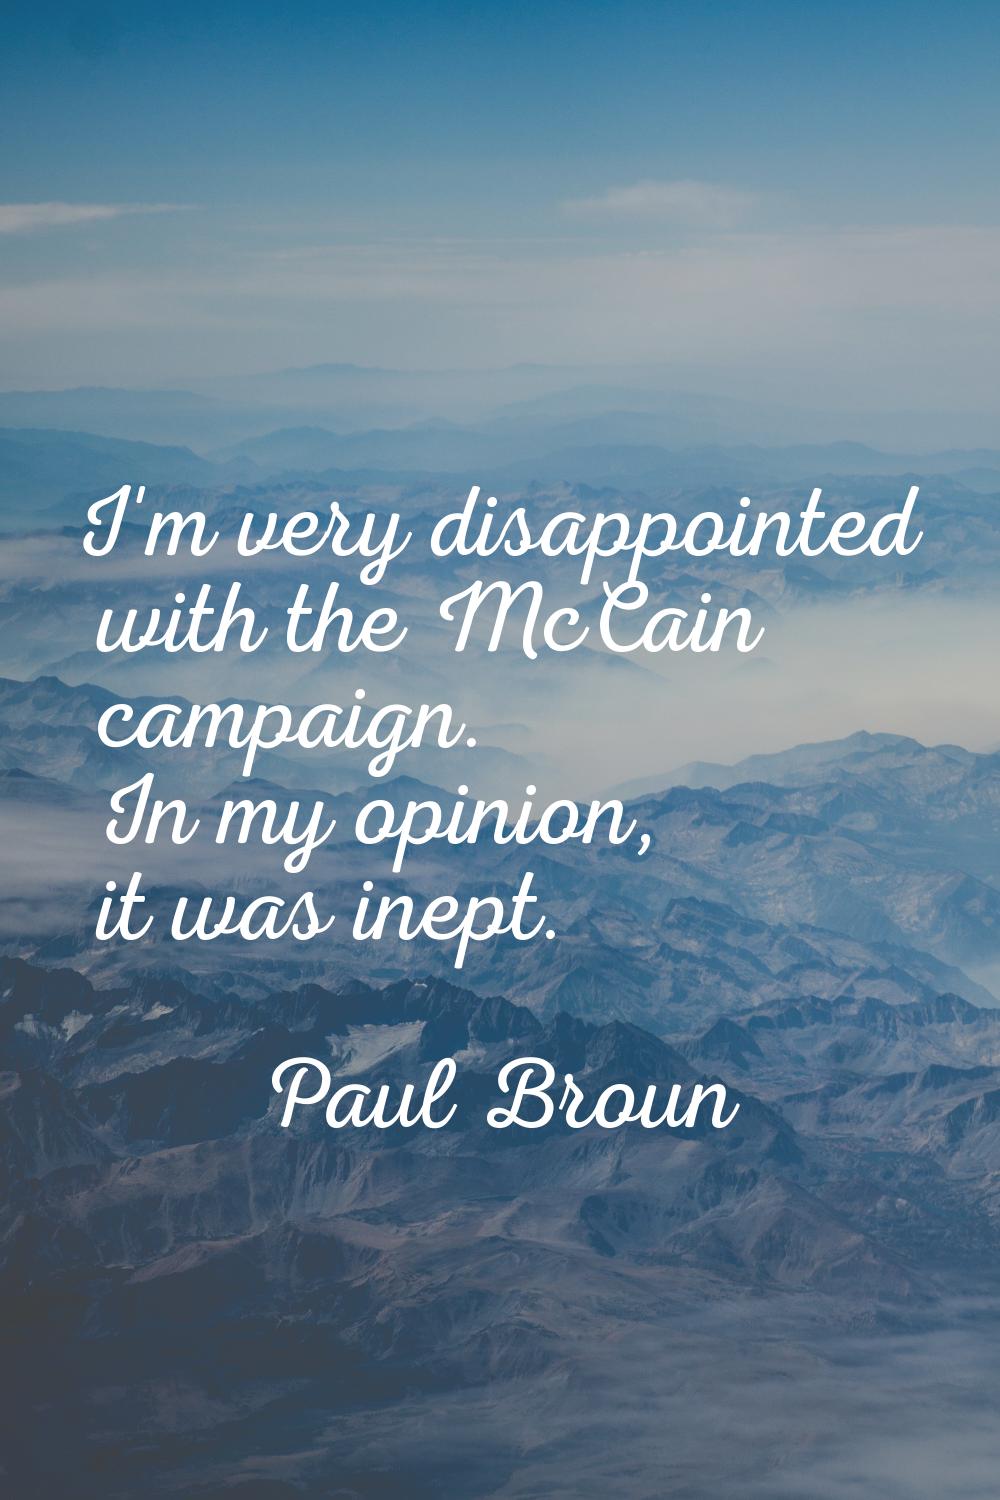 I'm very disappointed with the McCain campaign. In my opinion, it was inept.